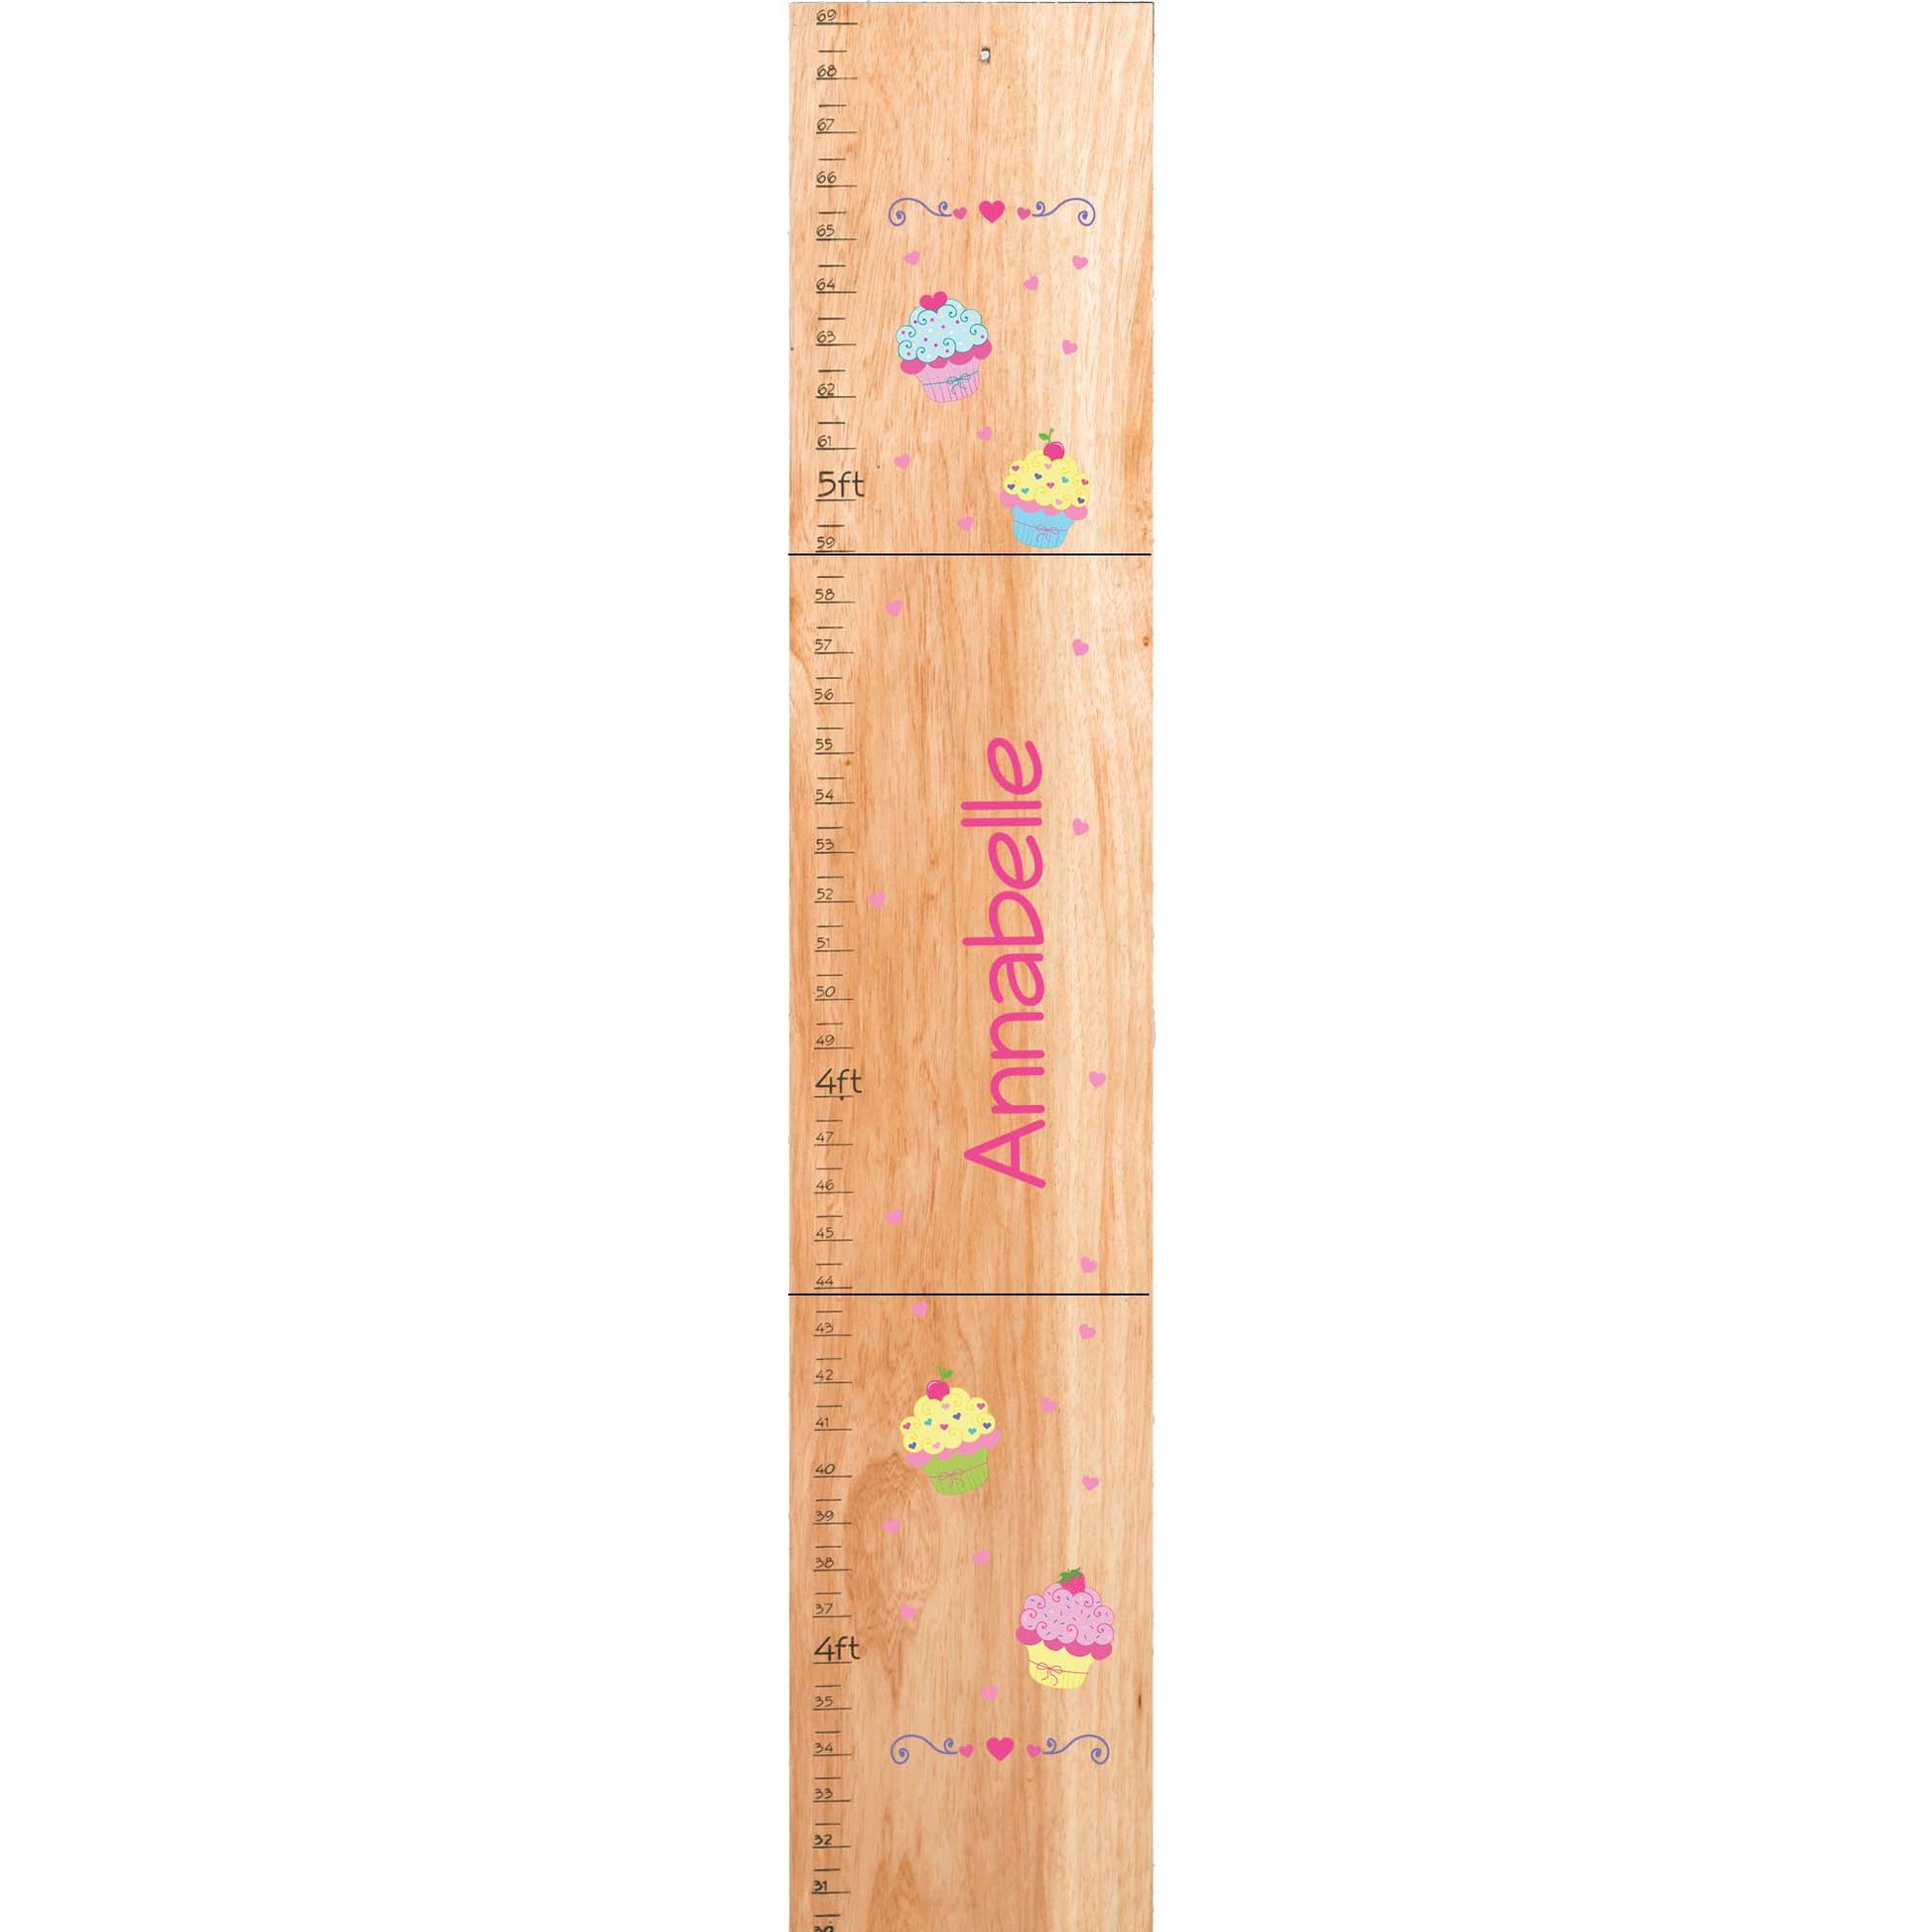 Personalized Natural Wooden Growth Chart with Cupcake design